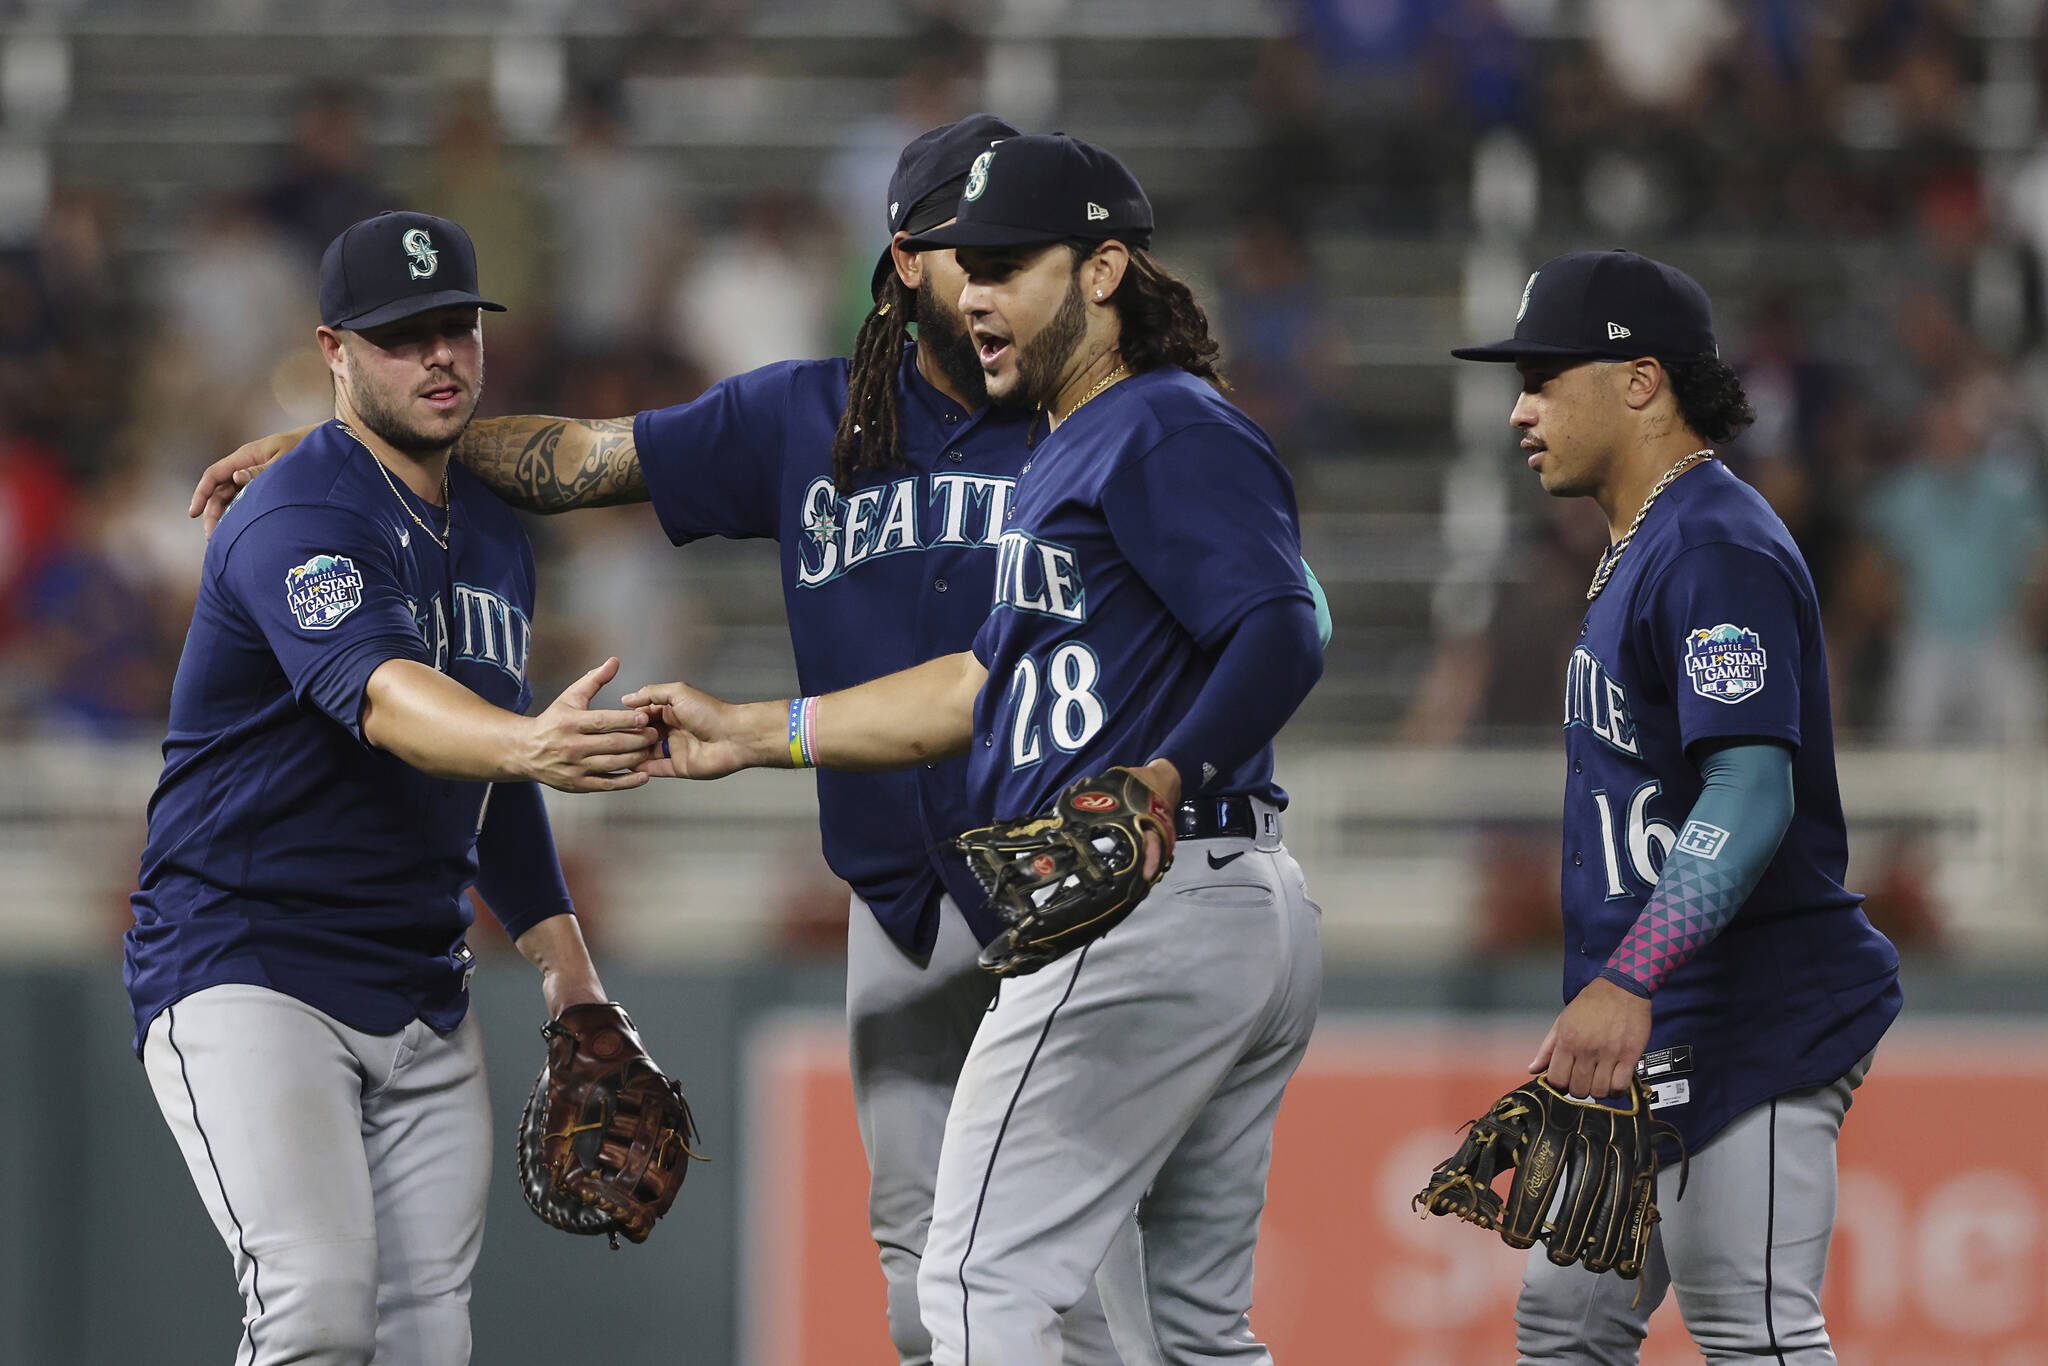 The Mariners’ Eugenio Suarez (28) high fives Ty France (left) in celebration after beating the Twins in a game on Tuesday in Minneapolis. (AP Photo/Stacy Bengs)